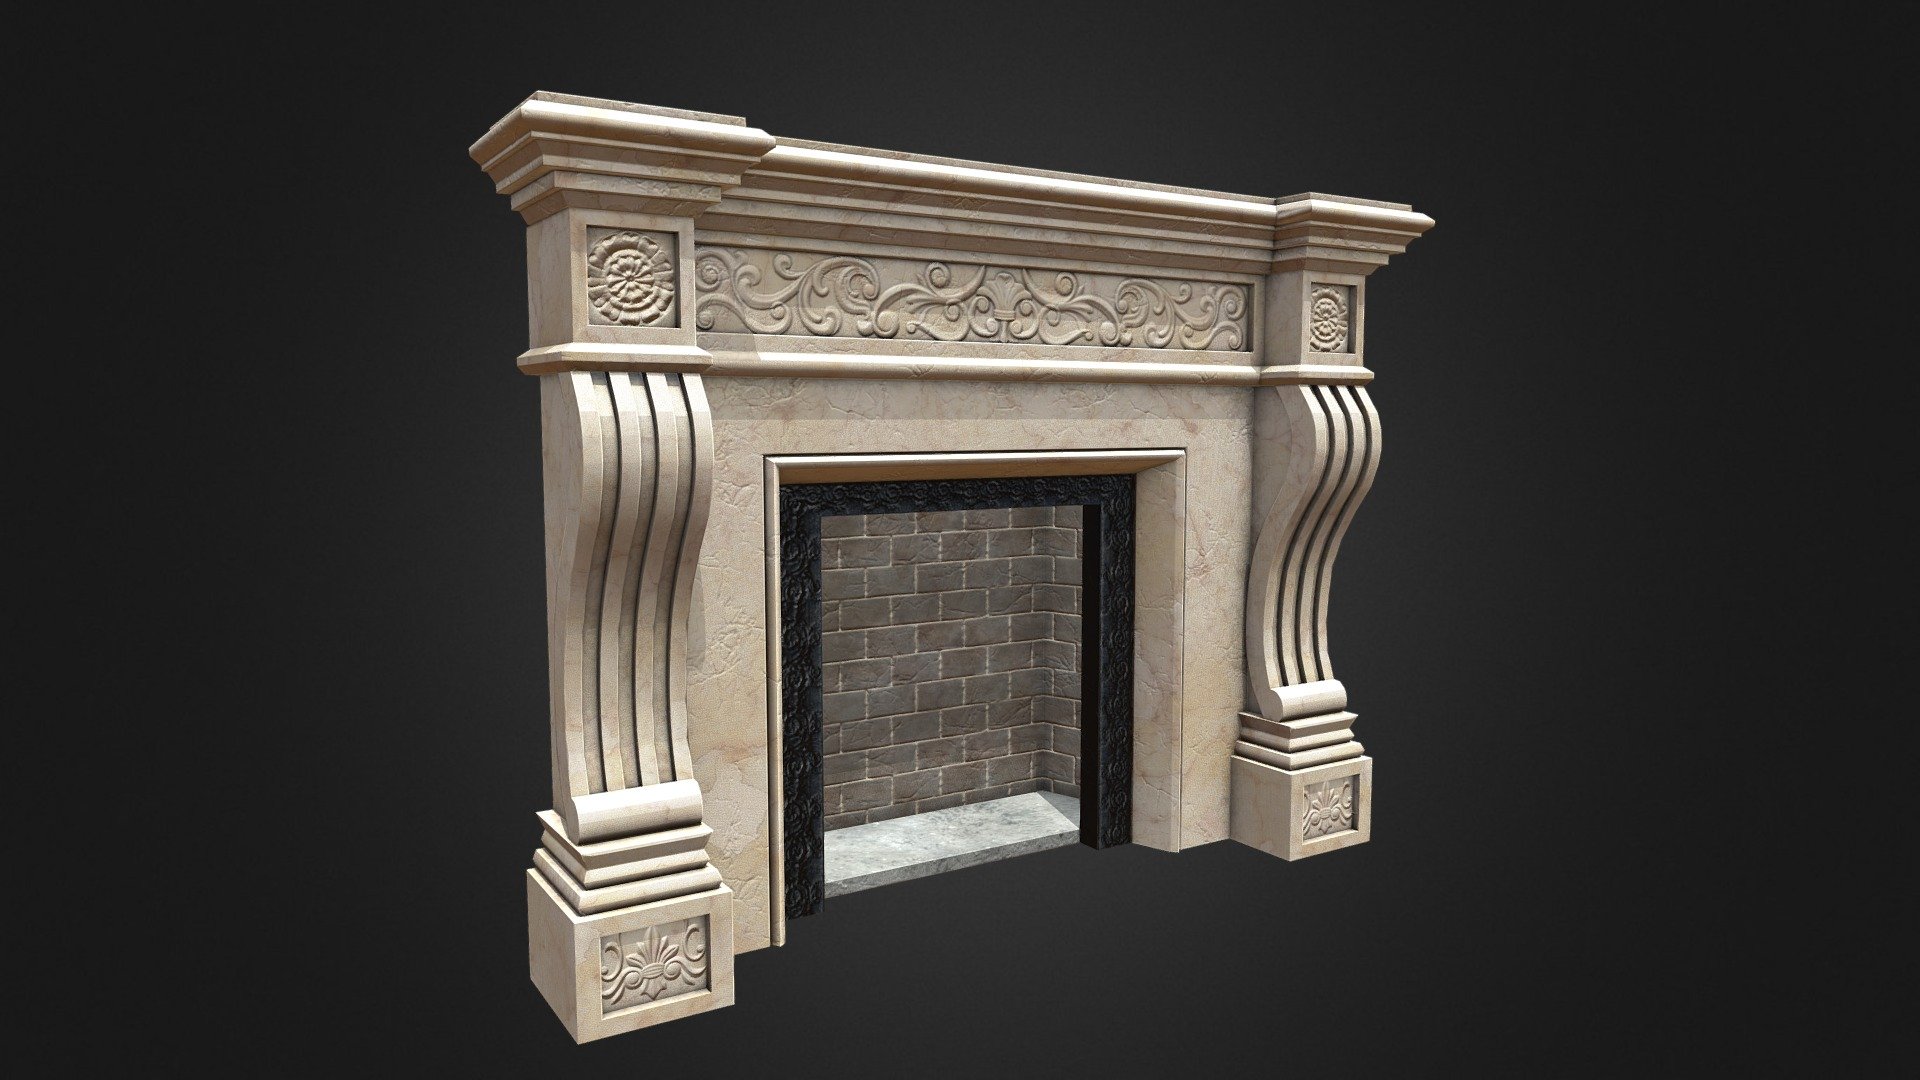 An Asset I made for the Search For A Star 2018 competition. The fireplace is inspired by baroque architecture 3d model